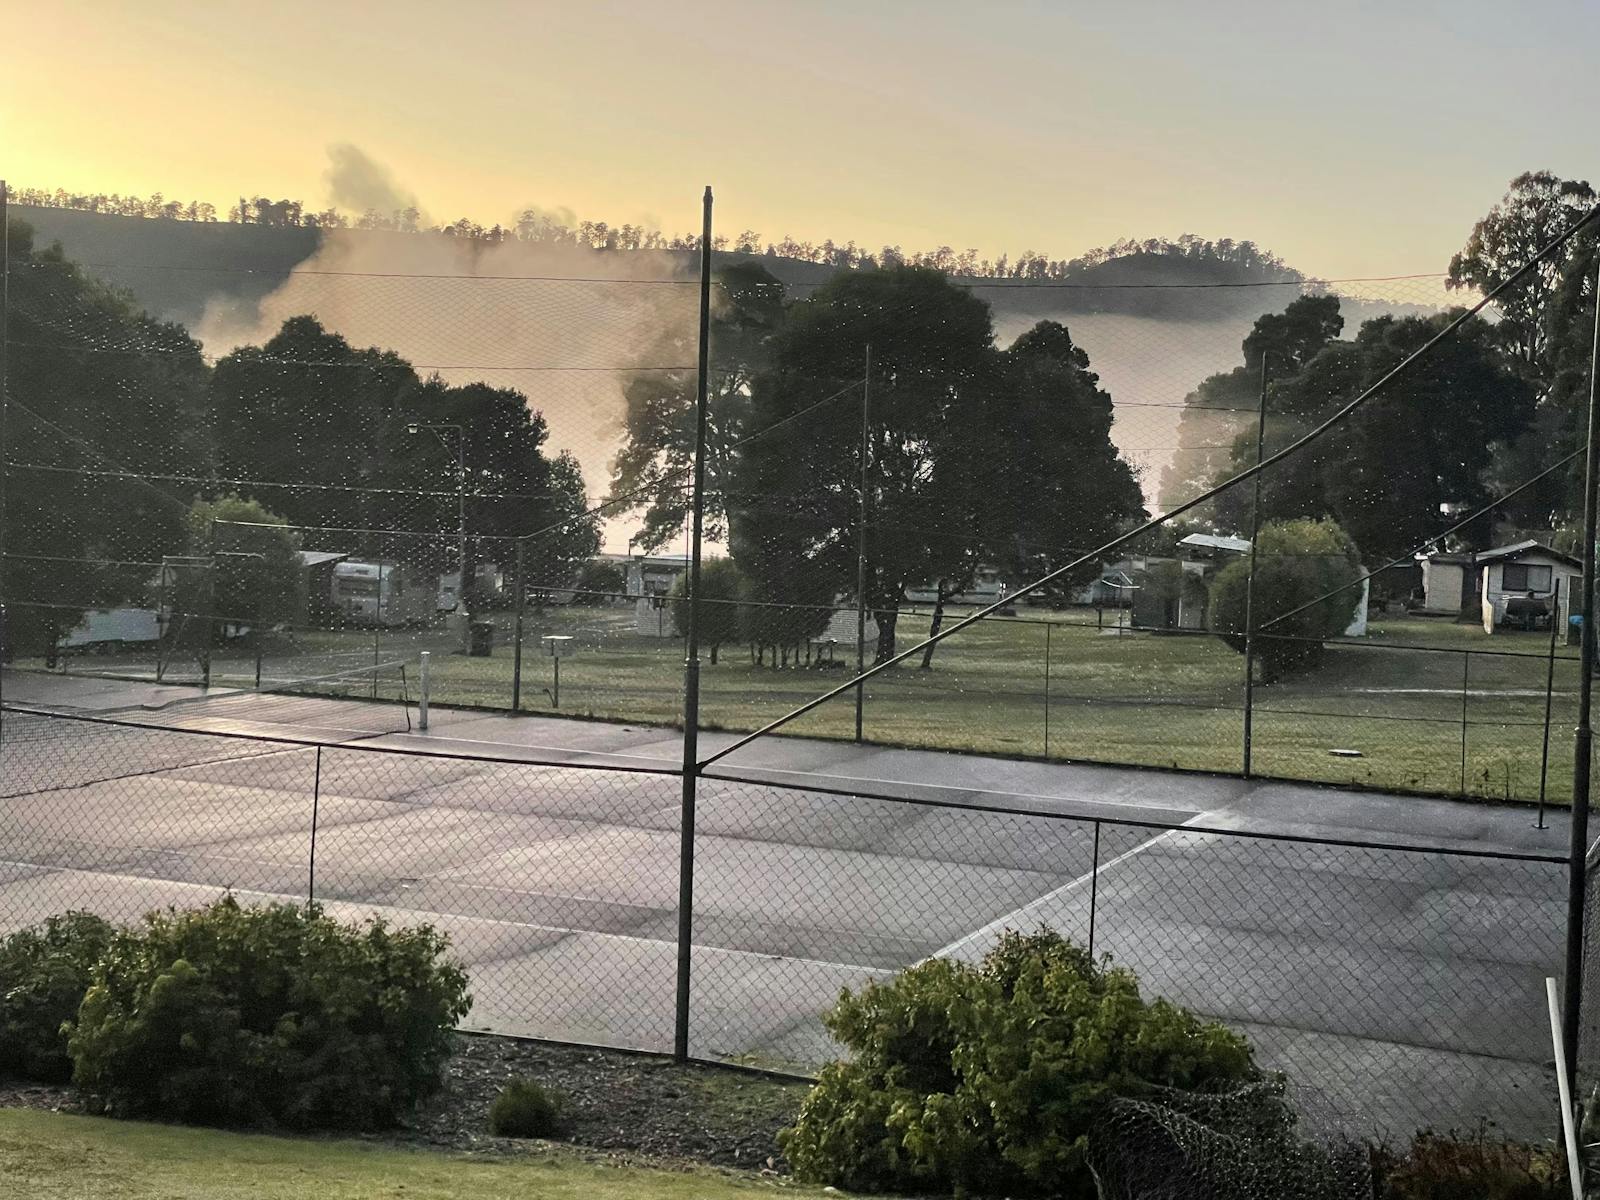 Tennis court and fog sitting over the lake